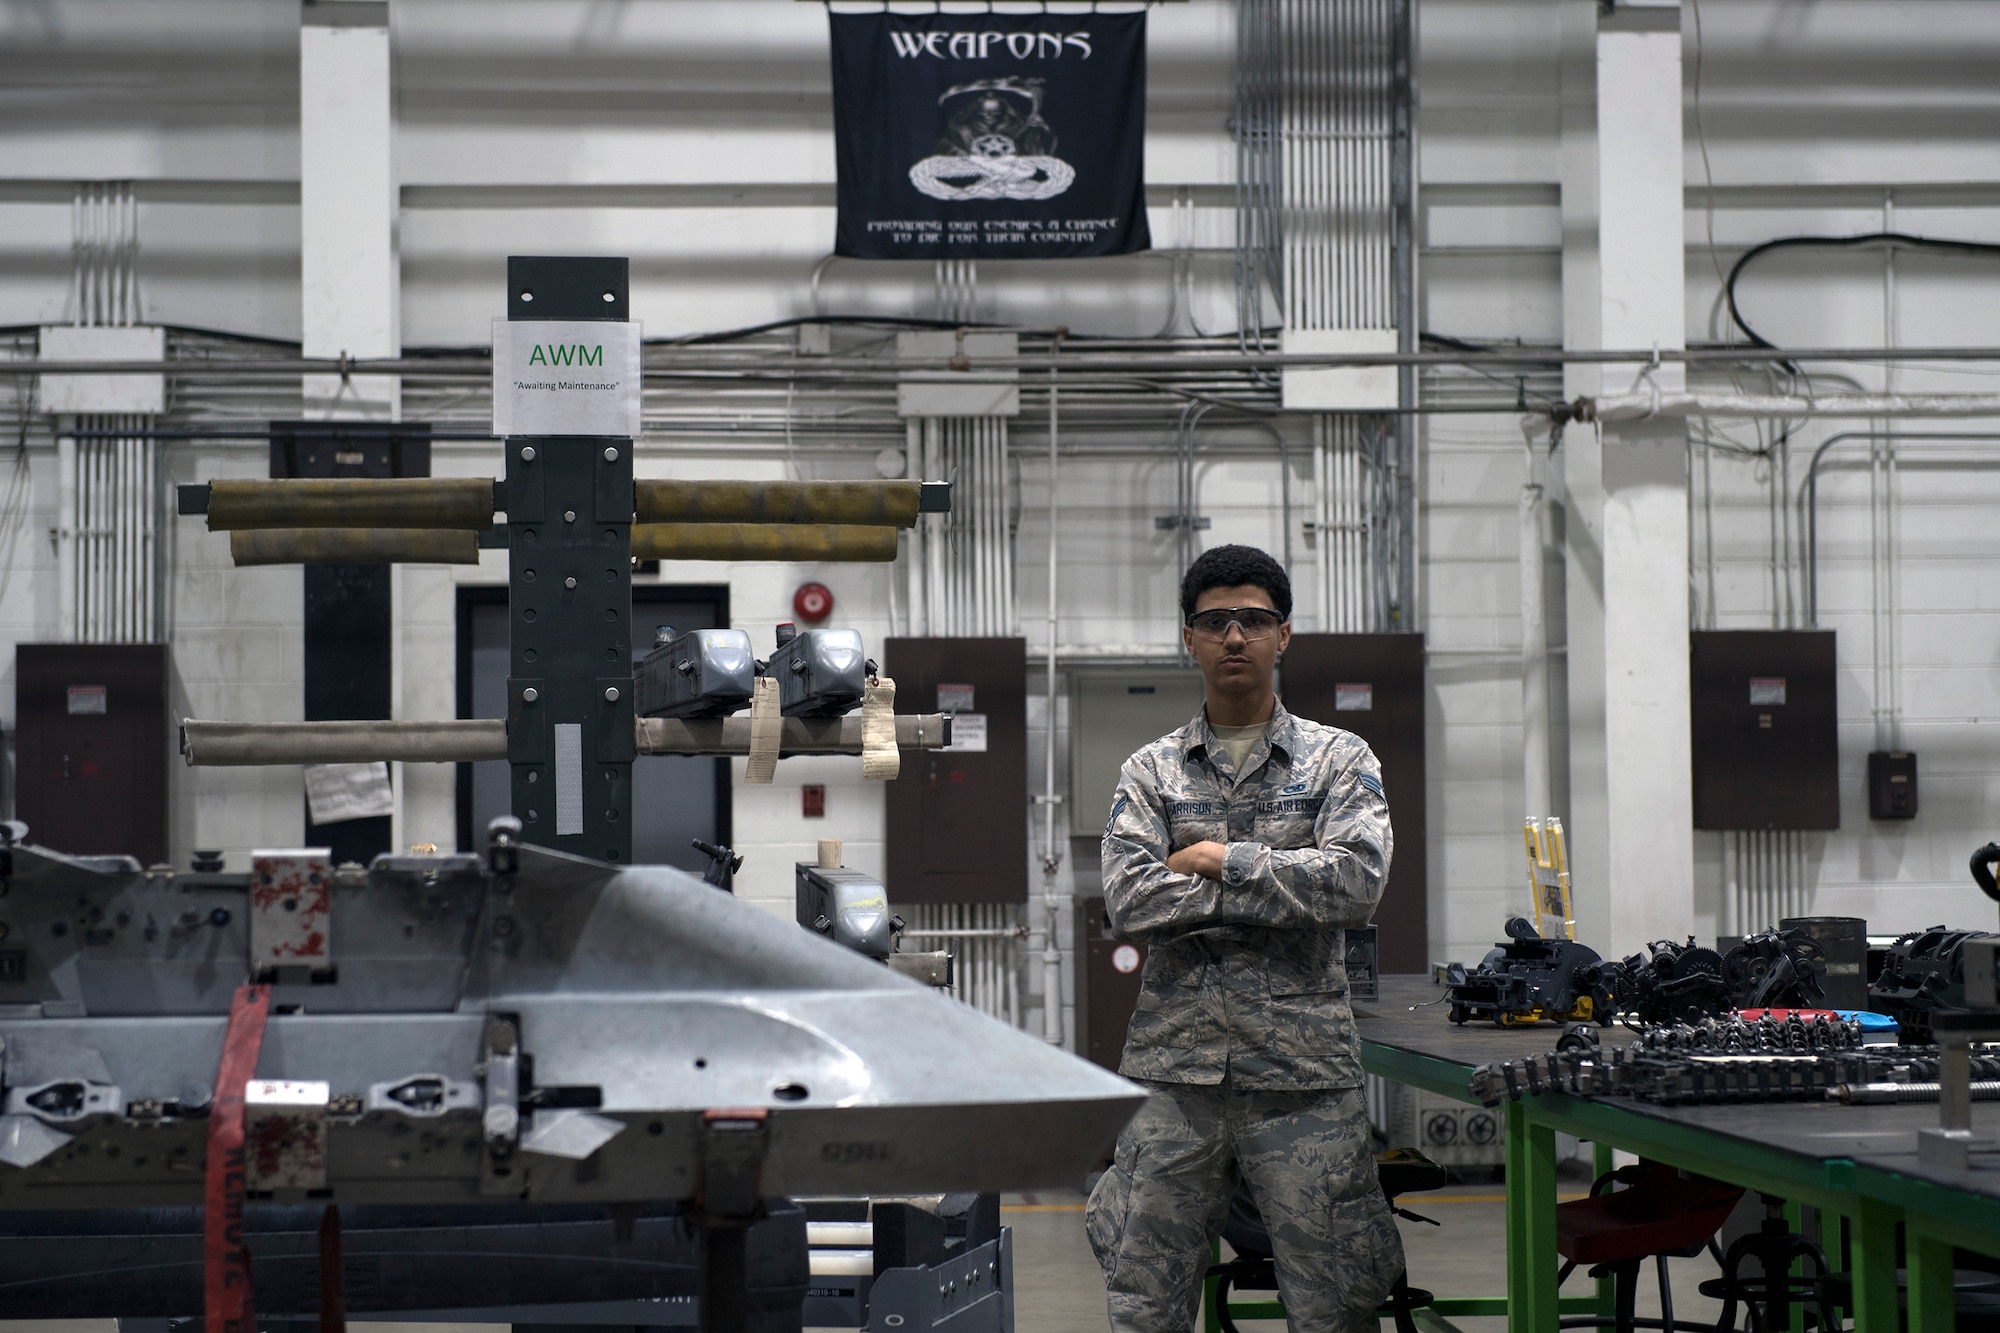 Senior Airman Jordan Harrison, 51st Munitions Squadron F-16 armament systems technician, poses under a weapons banner Oct. 23, 2019, at Osan Air Base, Republic of Korea. (U.S. Air Force photo by Staff Sgt. Gregory Nash)